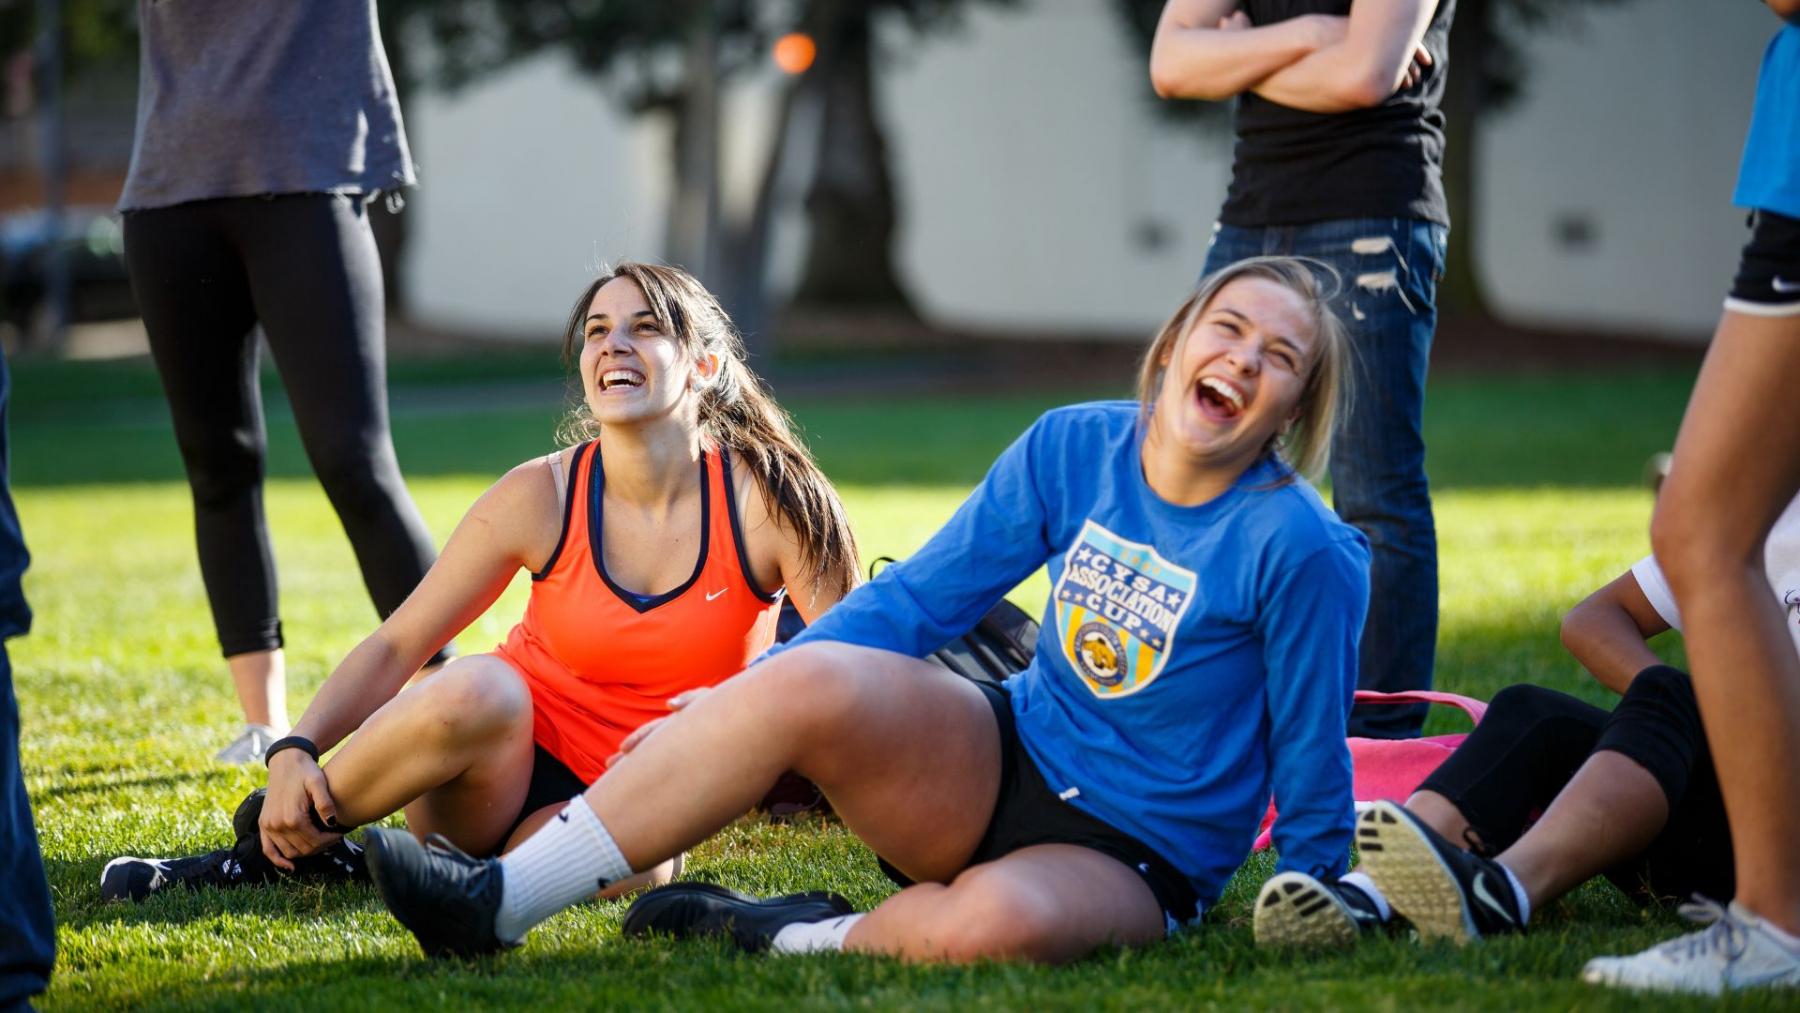 Two students on the lawn laughing in friendly competition